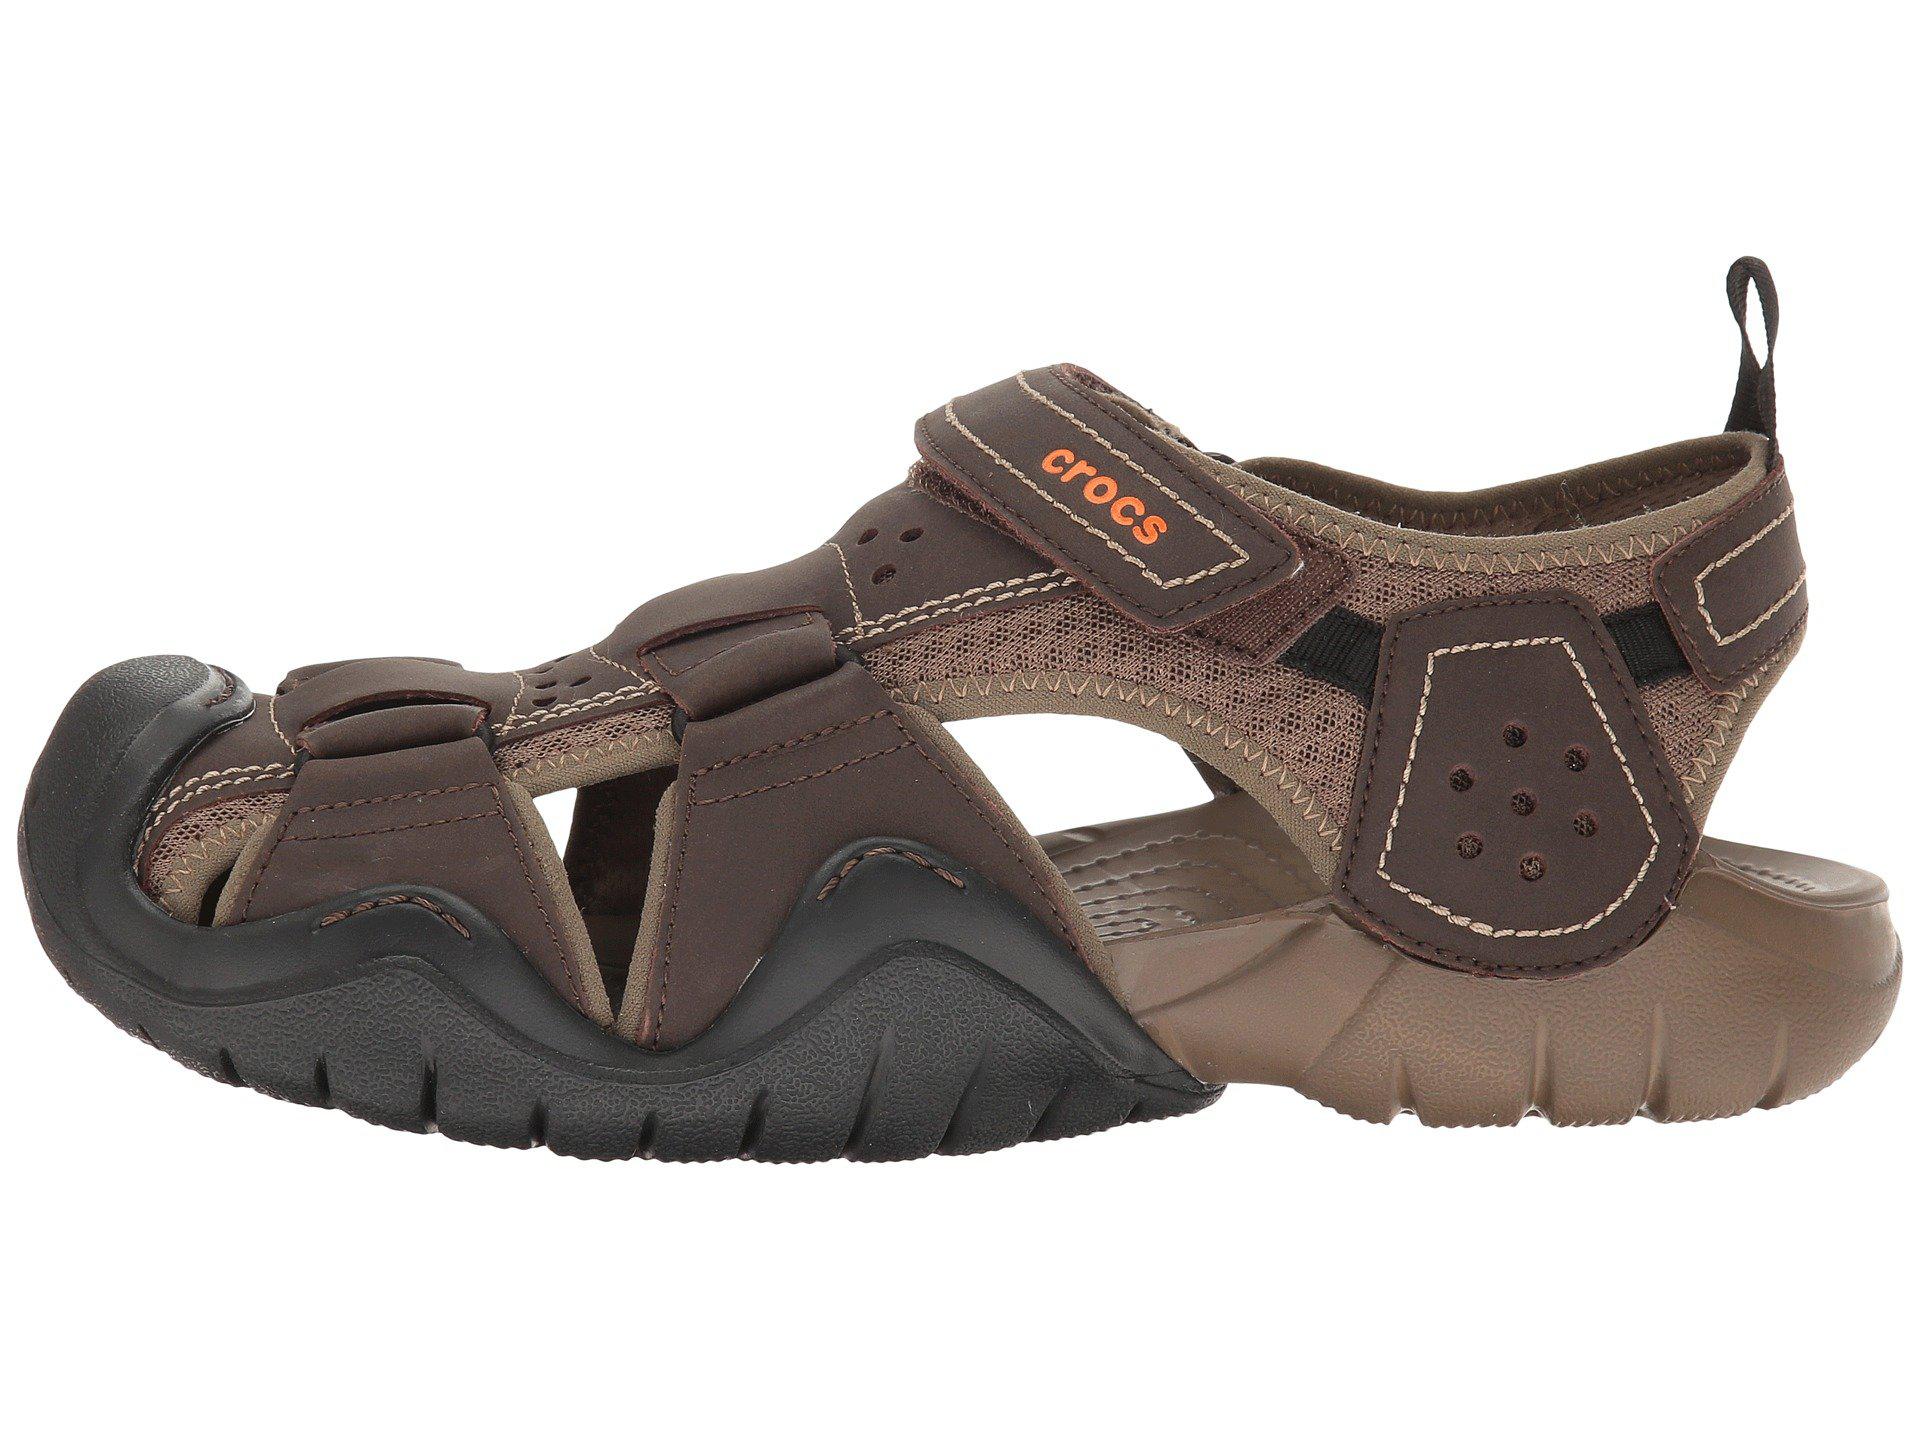 Crocs™ Leather Swiftwater Sandal in Espresso/Walnut (Brown) for Men - Save  16% - Lyst